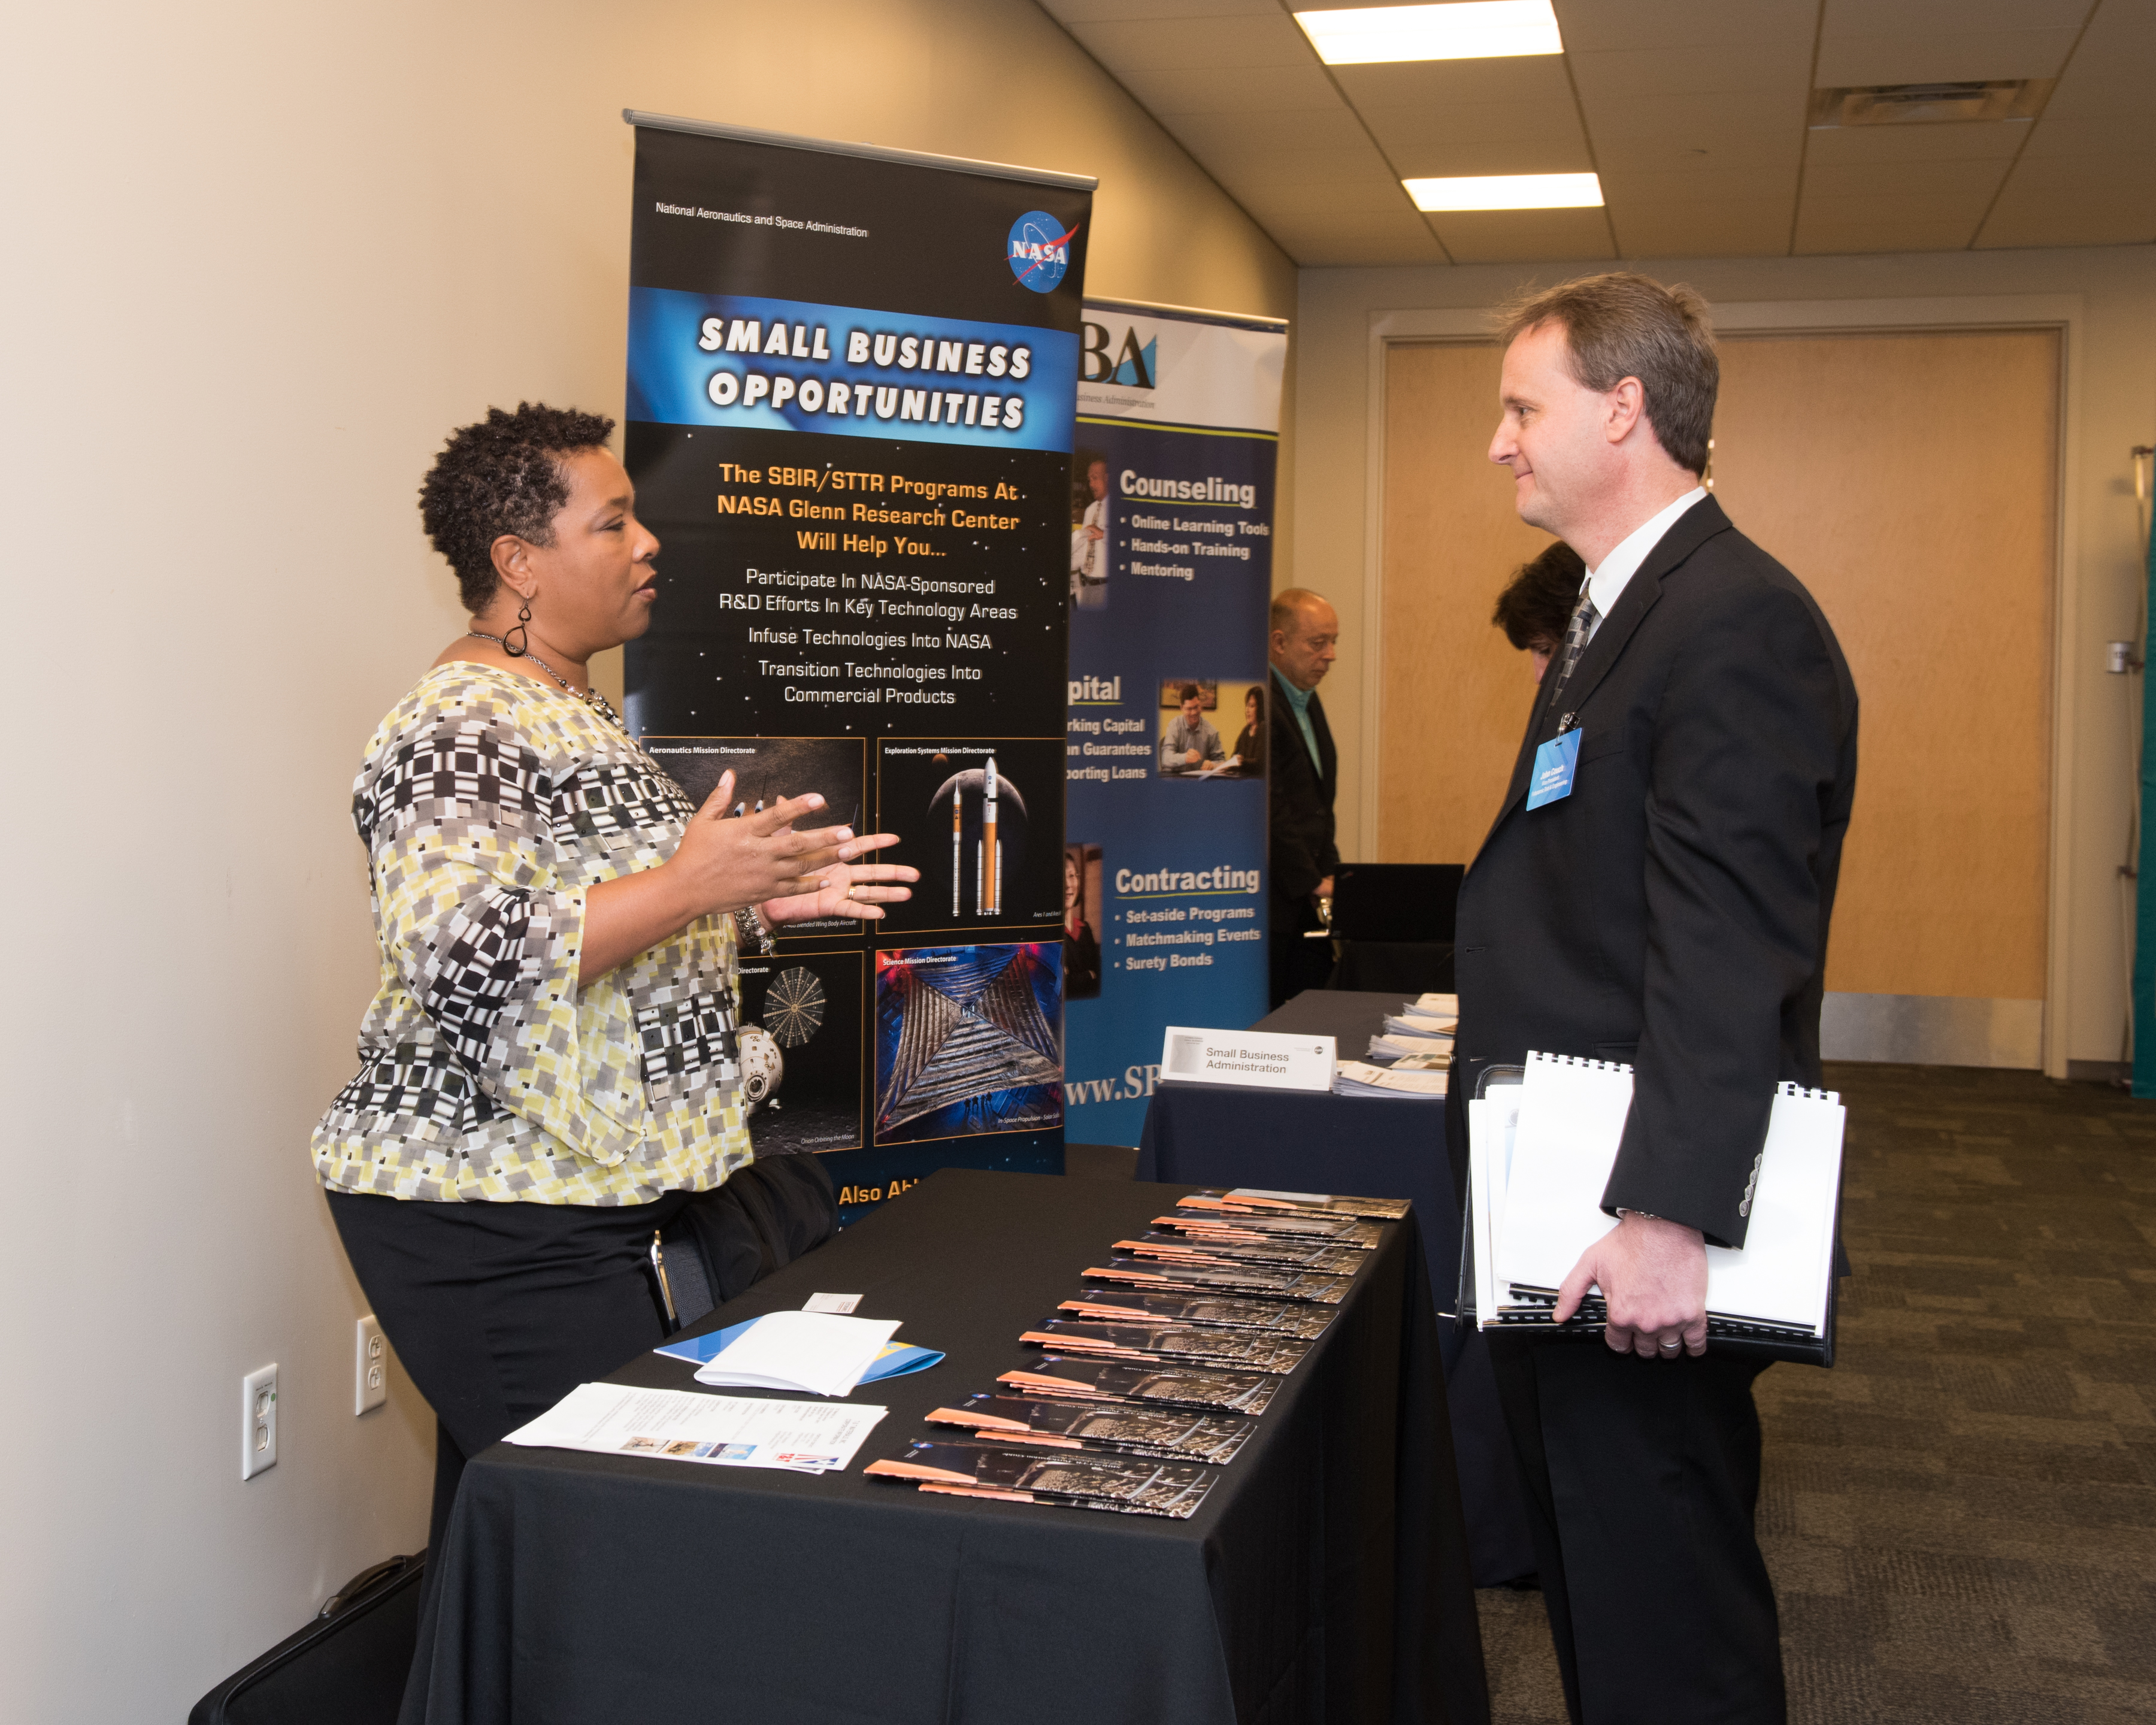 A business man speaks to a female NASA employee at a small business event.